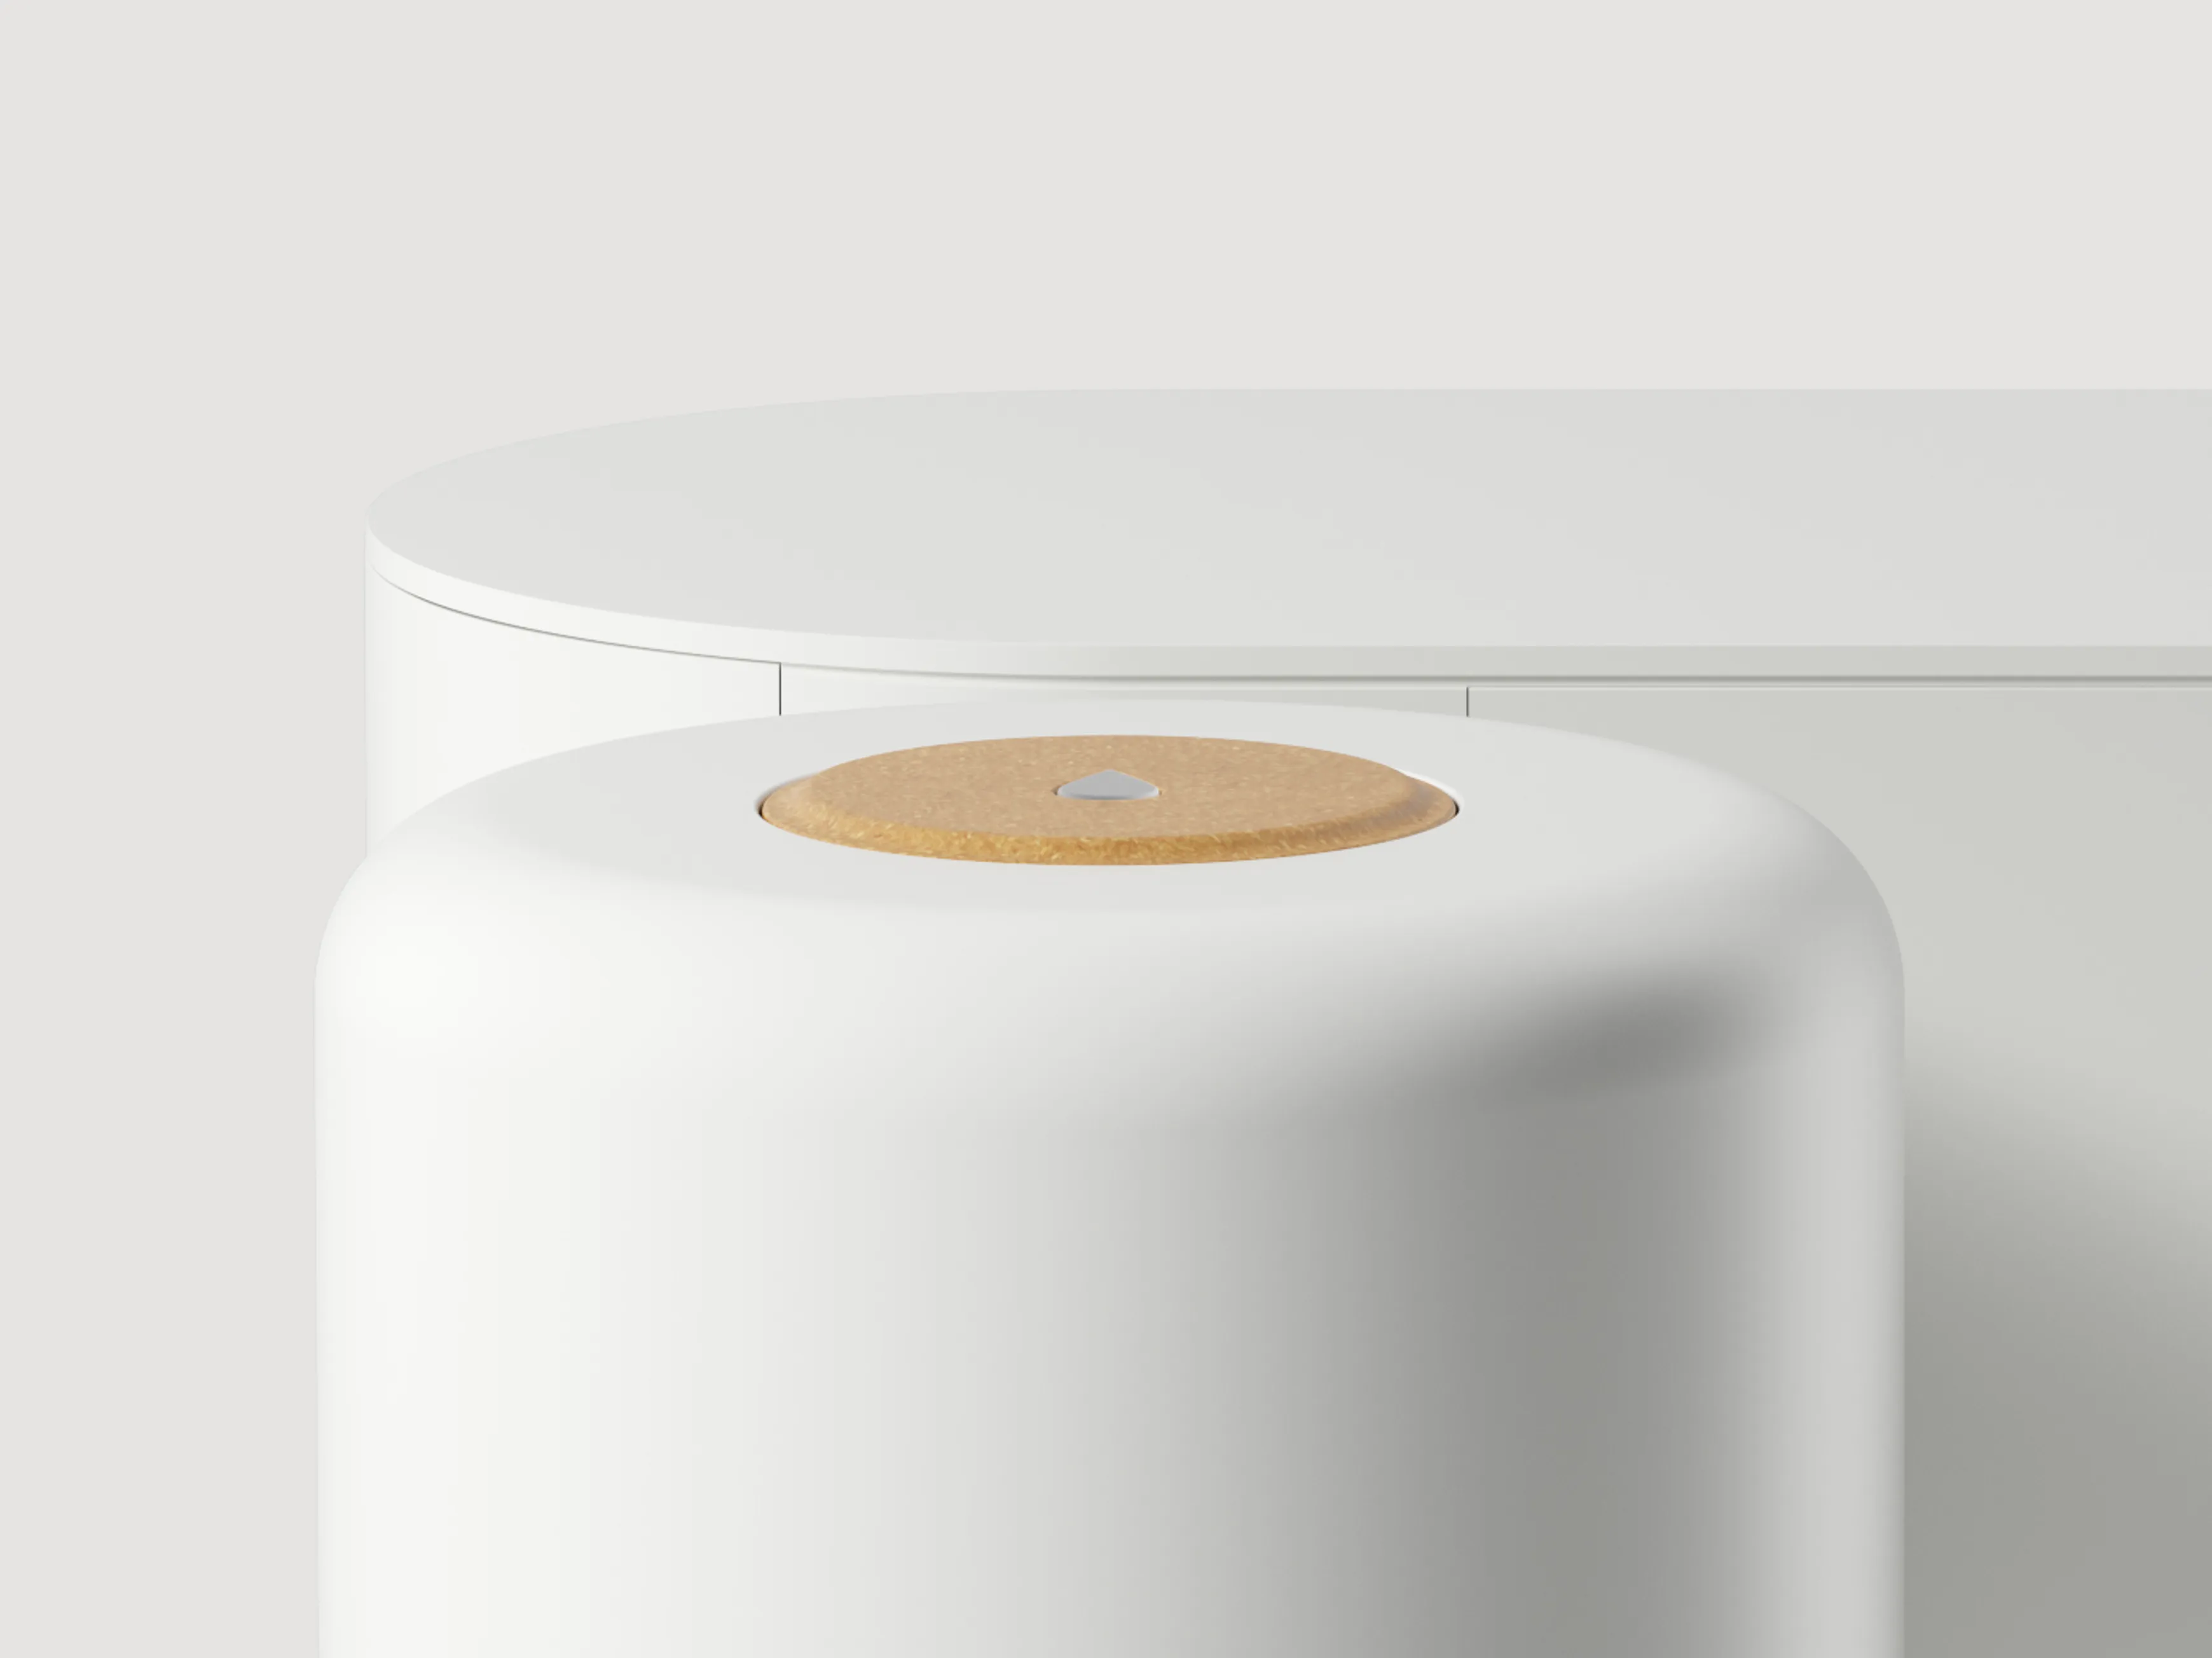 A detail of the Mitte water purifier showing its button made of sustainable plastic